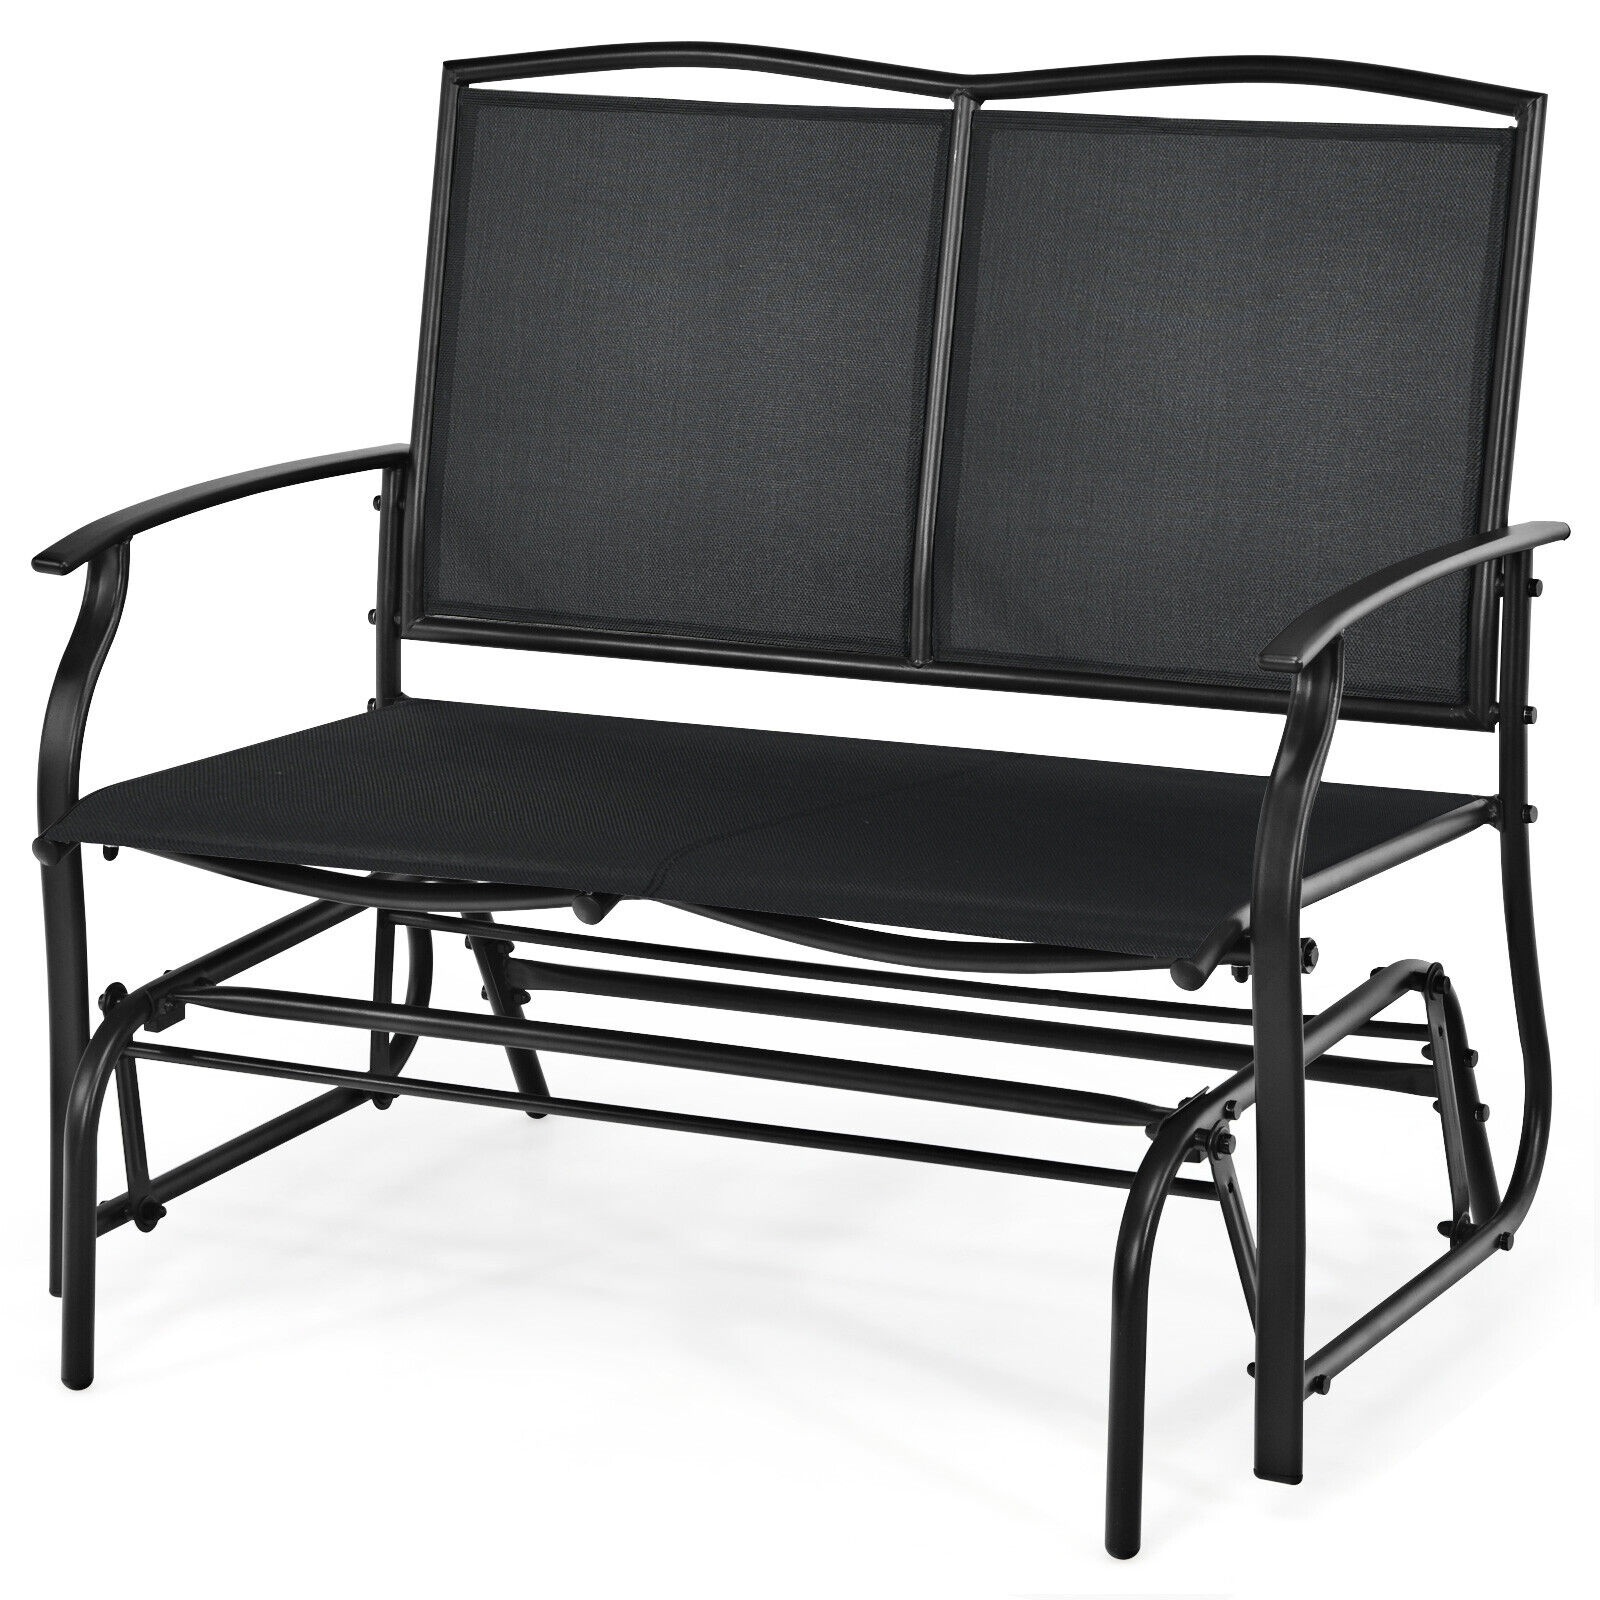 2-Person Patio Swing Glider Bench with Heavy-Duty Steel Frame-Black